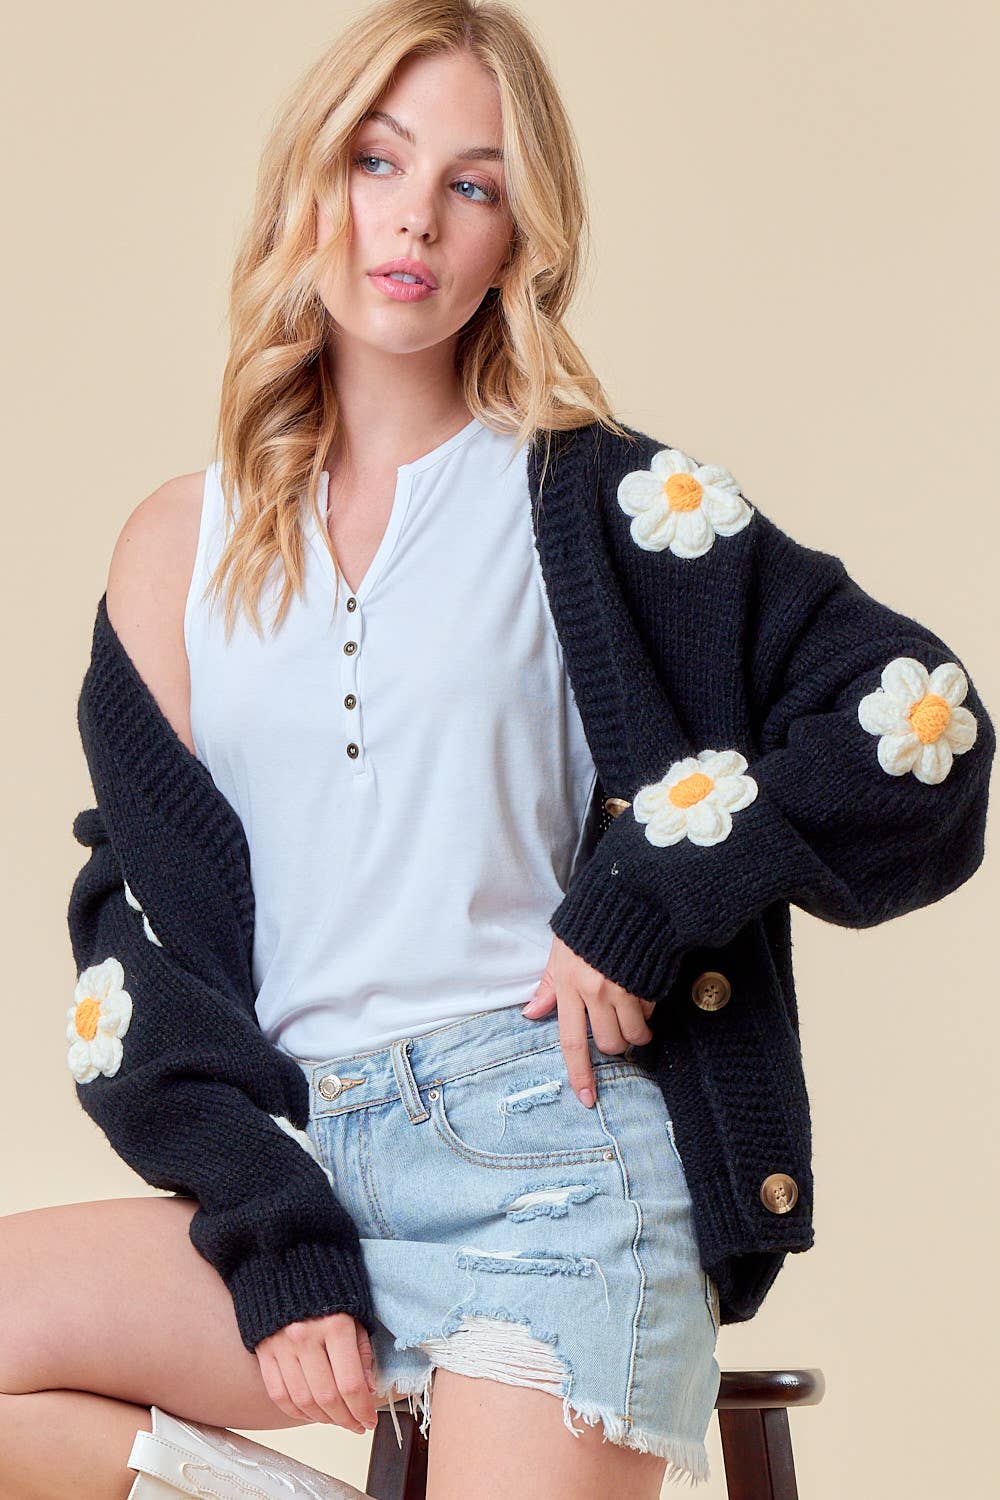 Fall And Winter Sweaters for Women 2023 Daisy Cardigan Sweaters Button Down  Sweater Cardigan Flower Print Sweater Knit Cardigan Top Women Sweaters